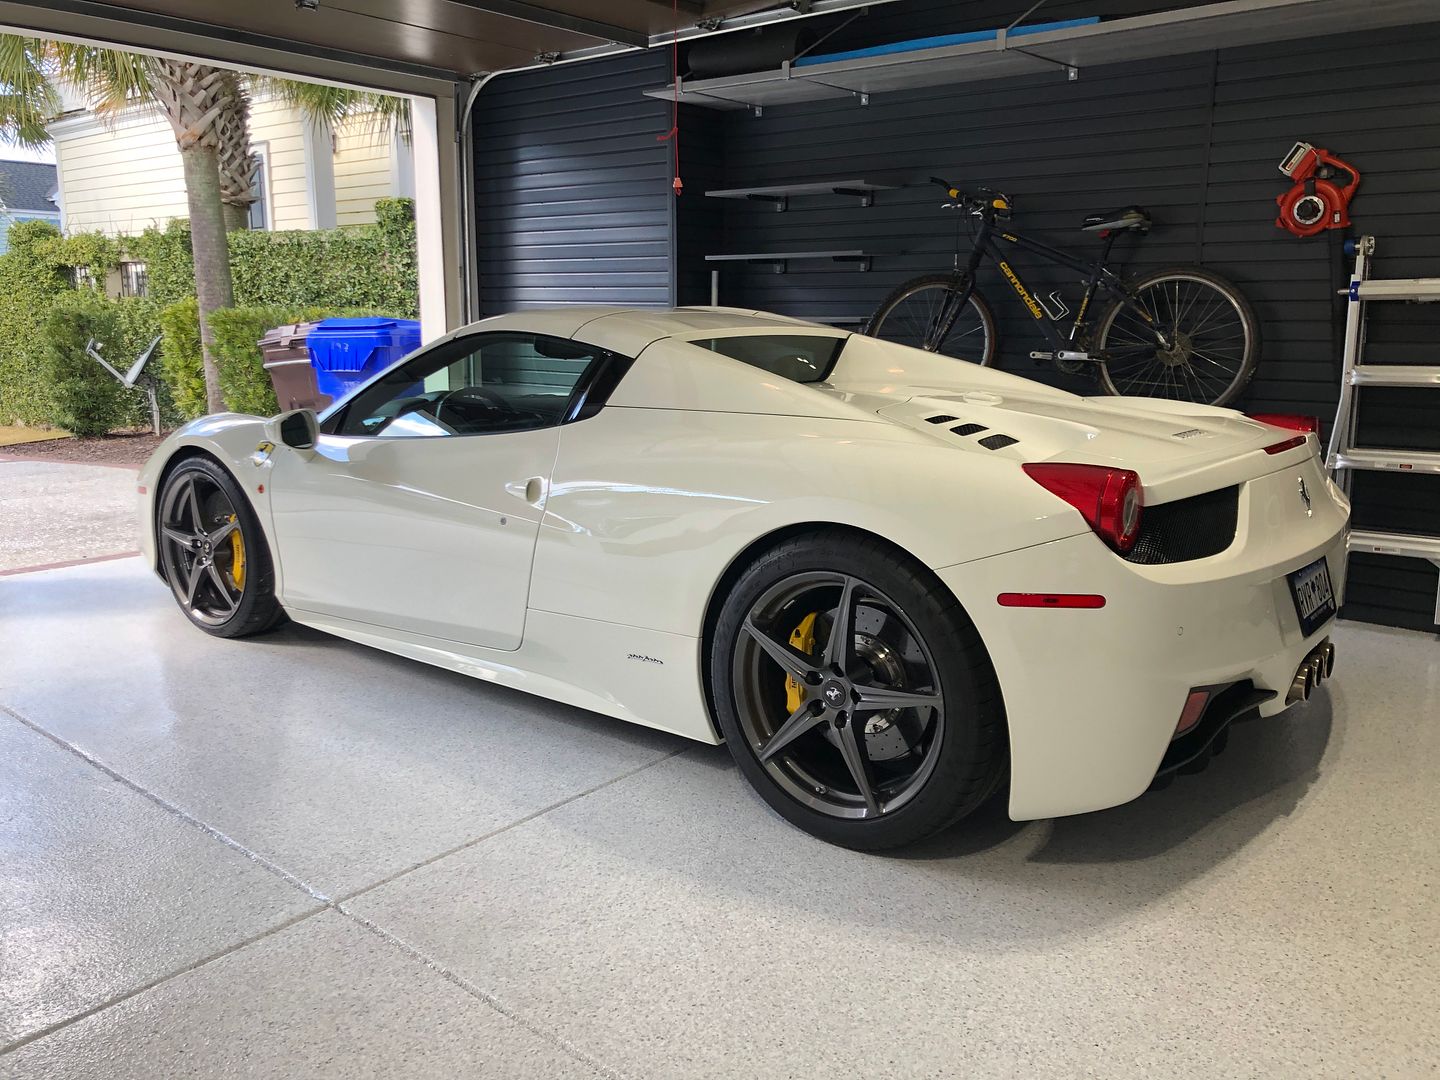 Pictures of US 458's lowered on STOCK springs | Page 2 | FerrariChat